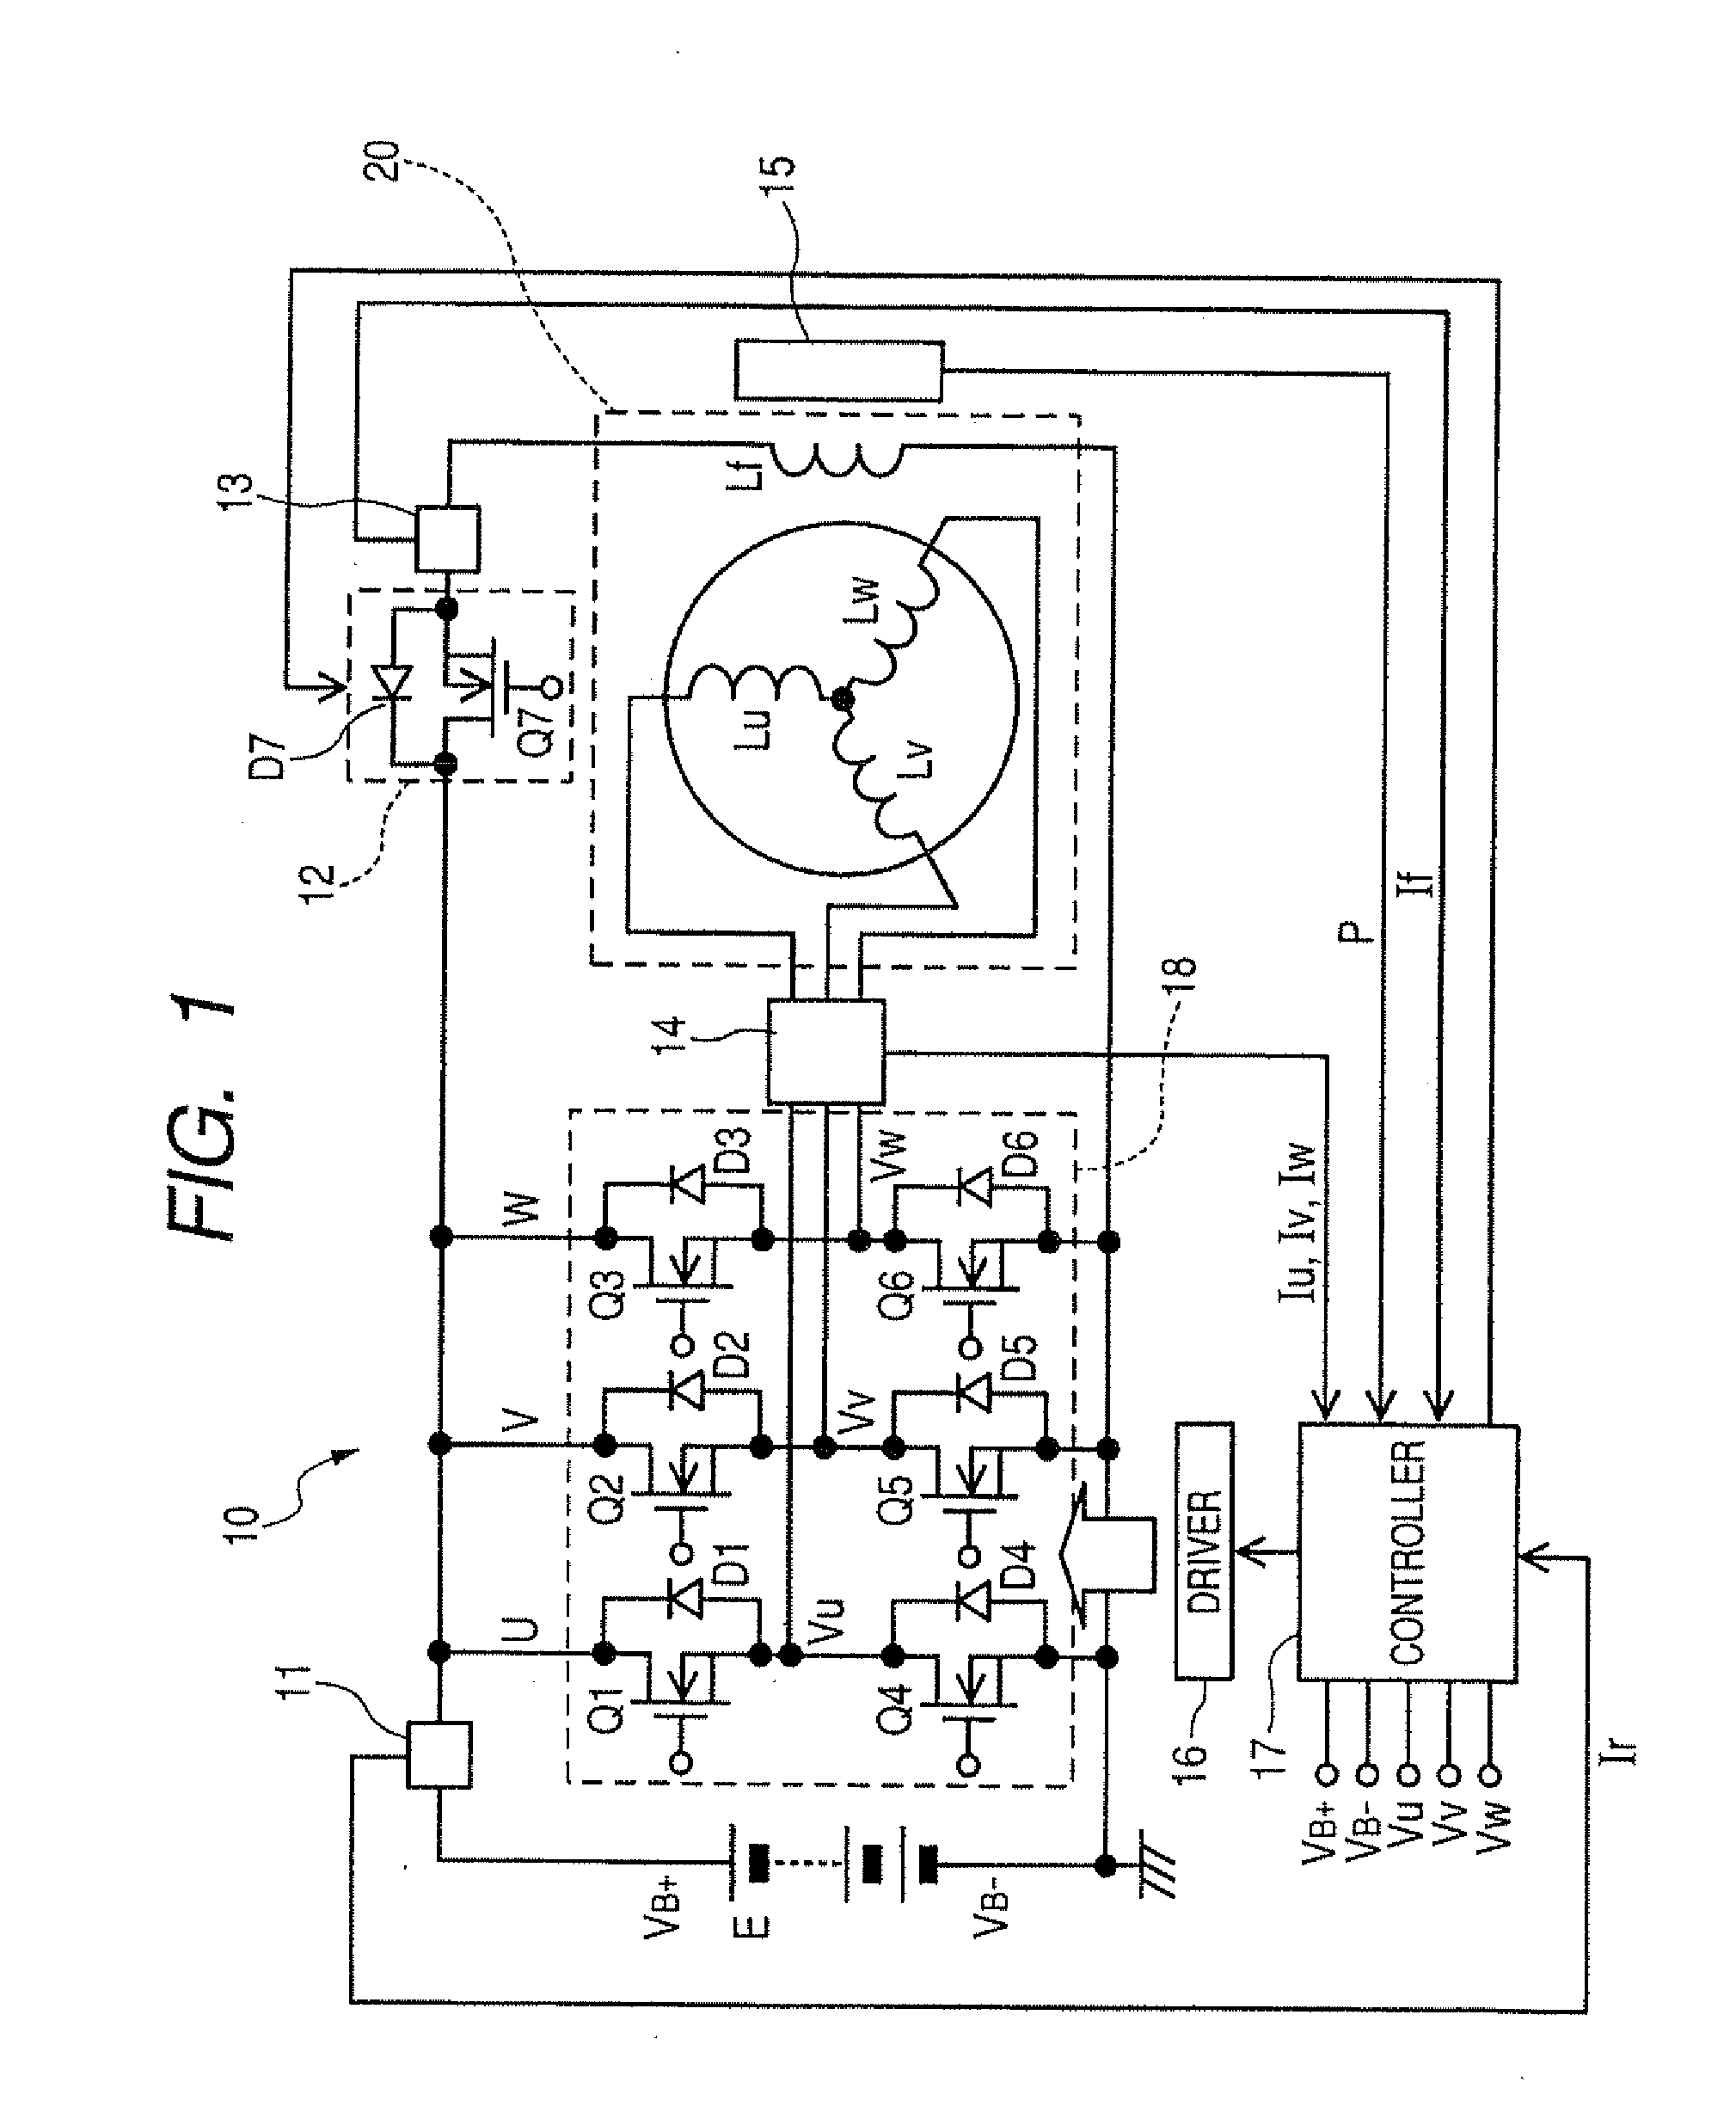 Power converter for electric rotating machine